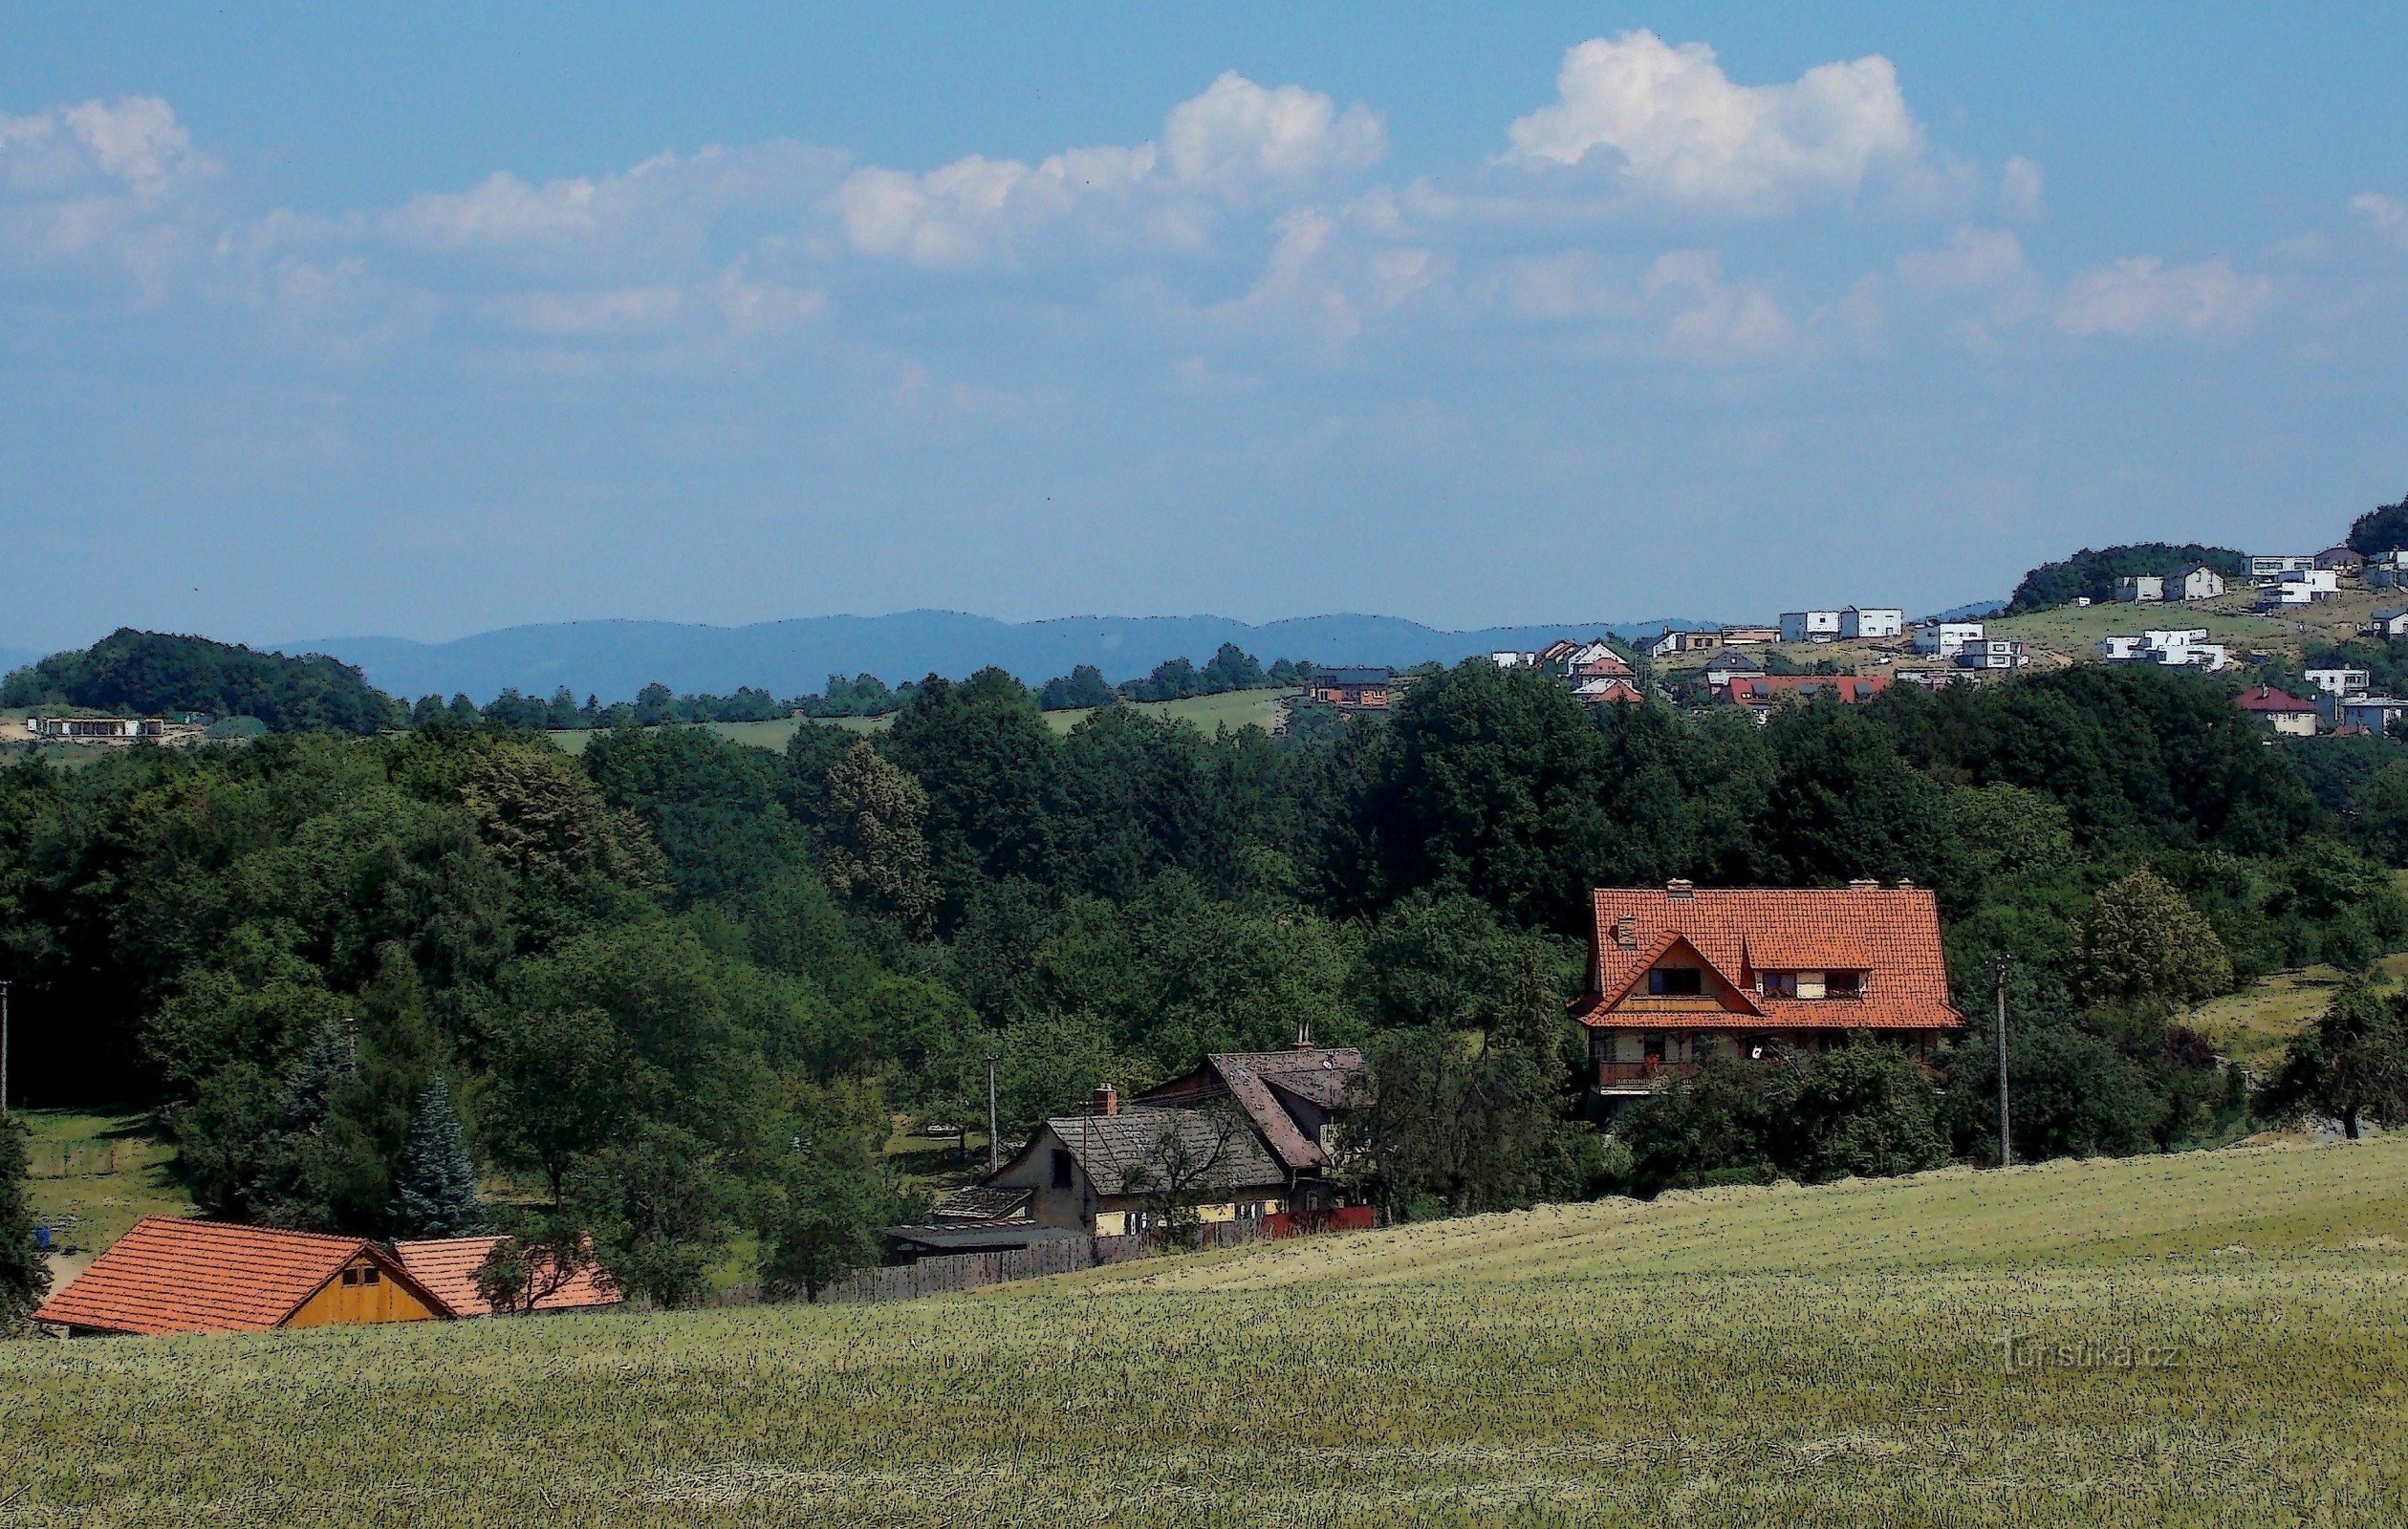 Afternoon walk through the forest with a view of Zlín